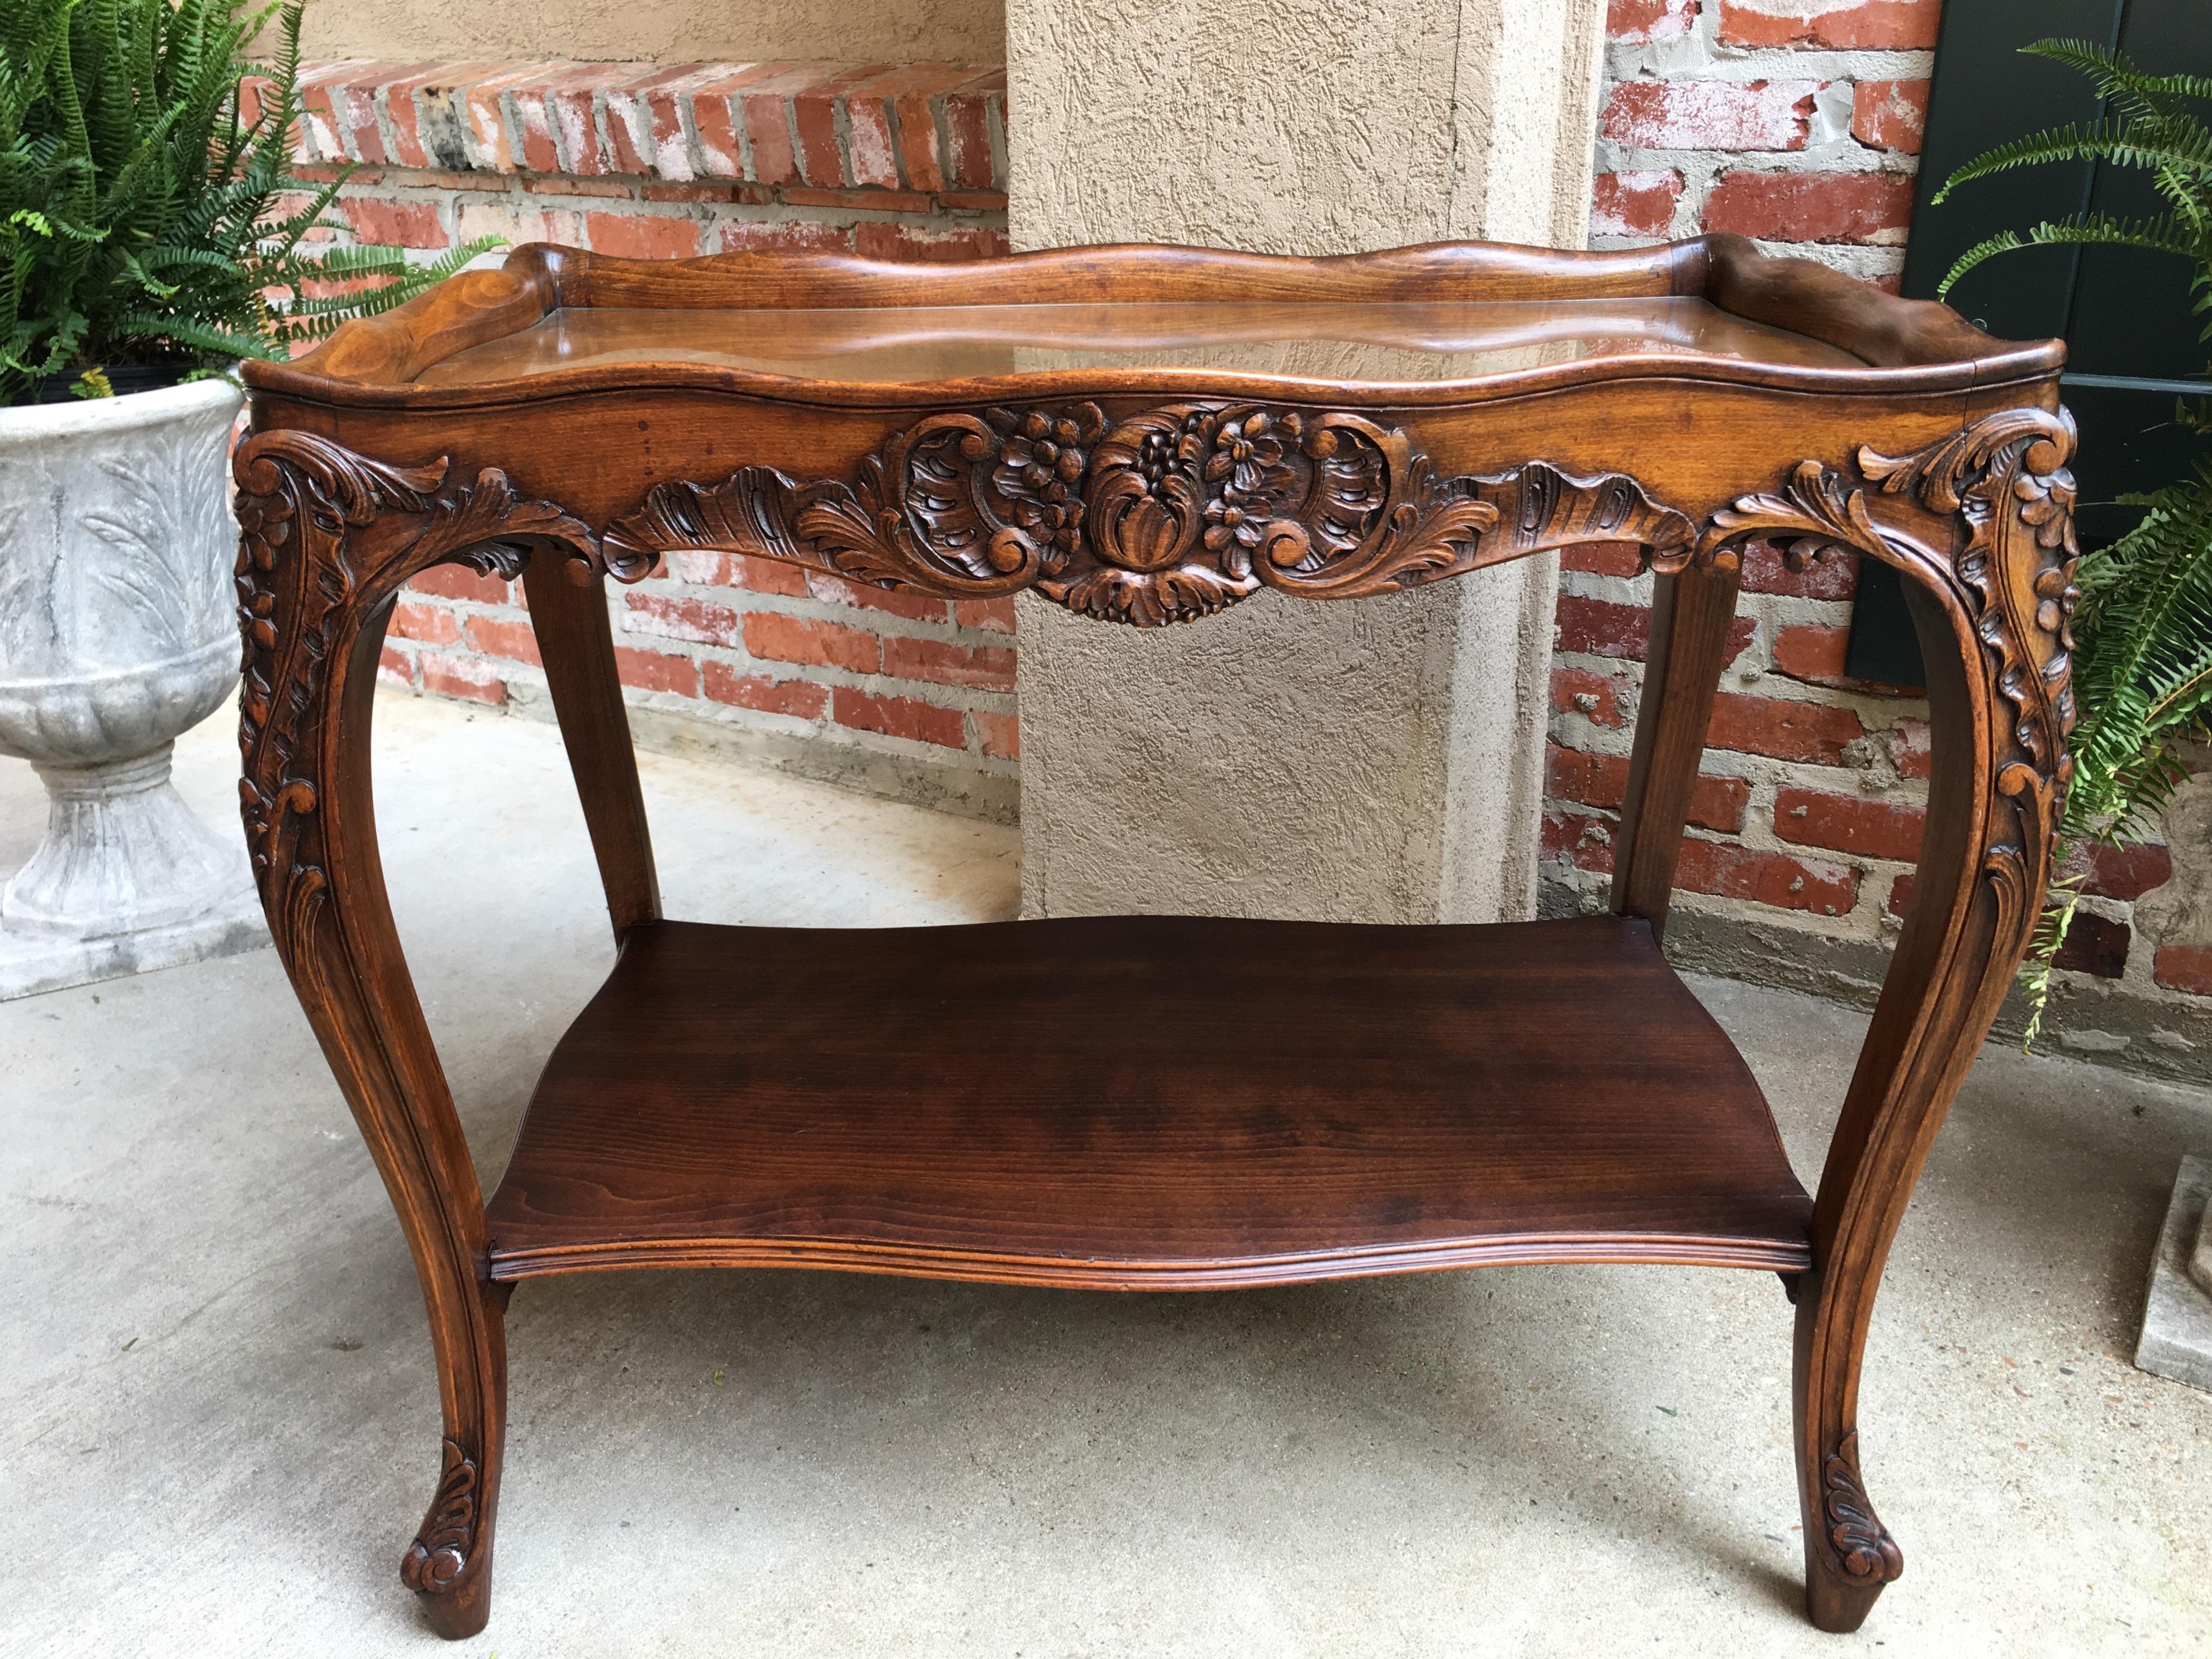 Direct from France, a superb antique French side table with quintessential French style and endless possibilities!
~ The gorgeous Louis XV style silhouette just takes my breath away and the craftsmanship is superb from top to bottom!
~ Ornate hand